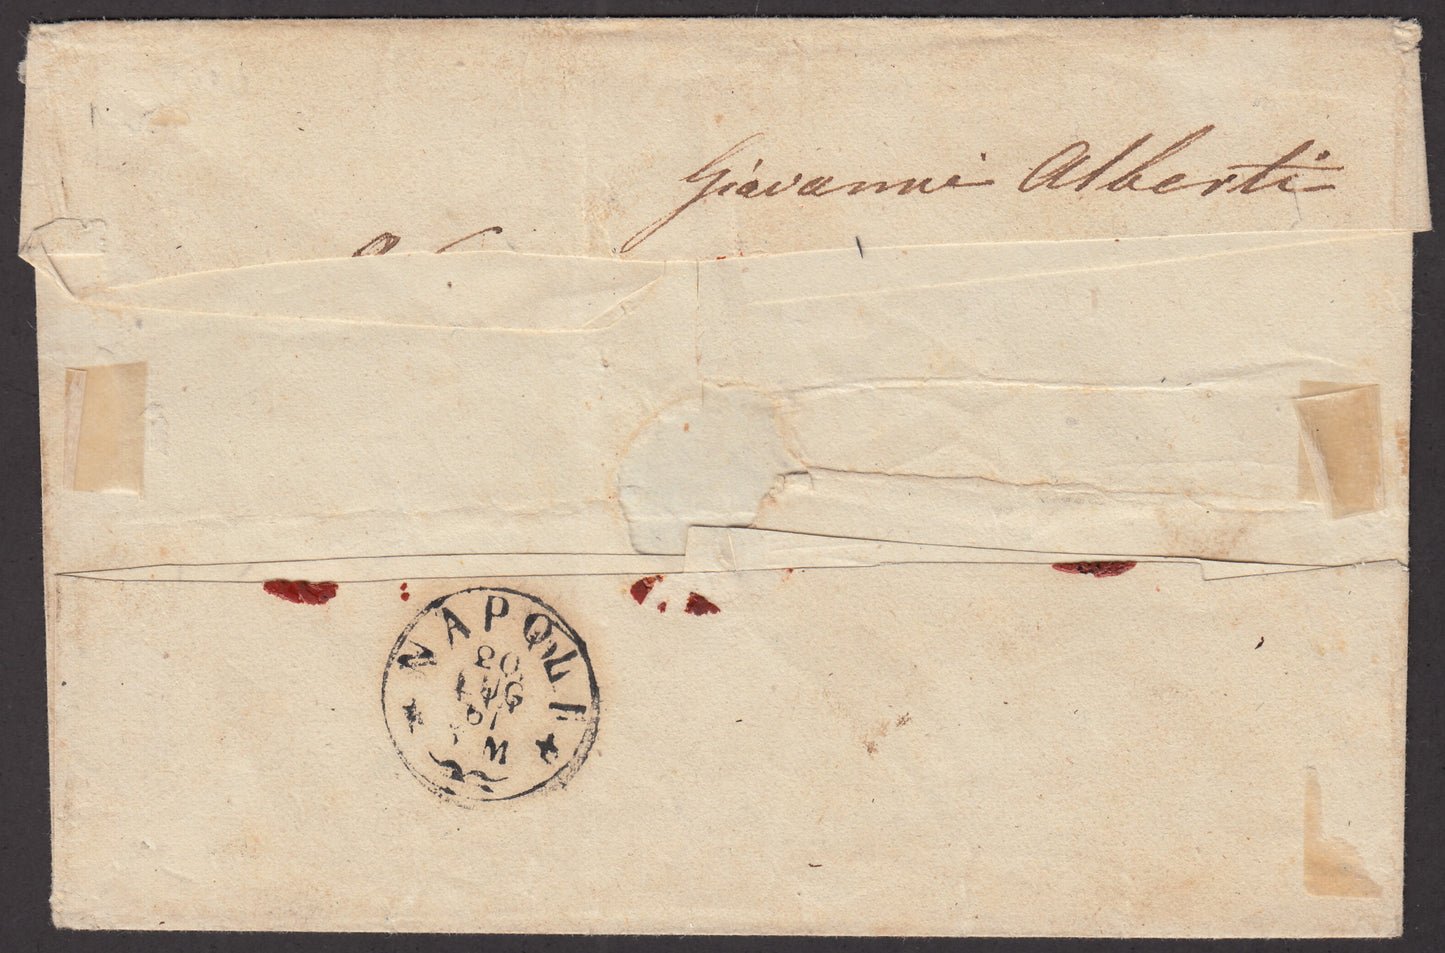 BA23_83 - 1861 - Letter sent from Foggia to Naples 18/7/61 franked c. 20 grit yellow isolated, rare! (23a).